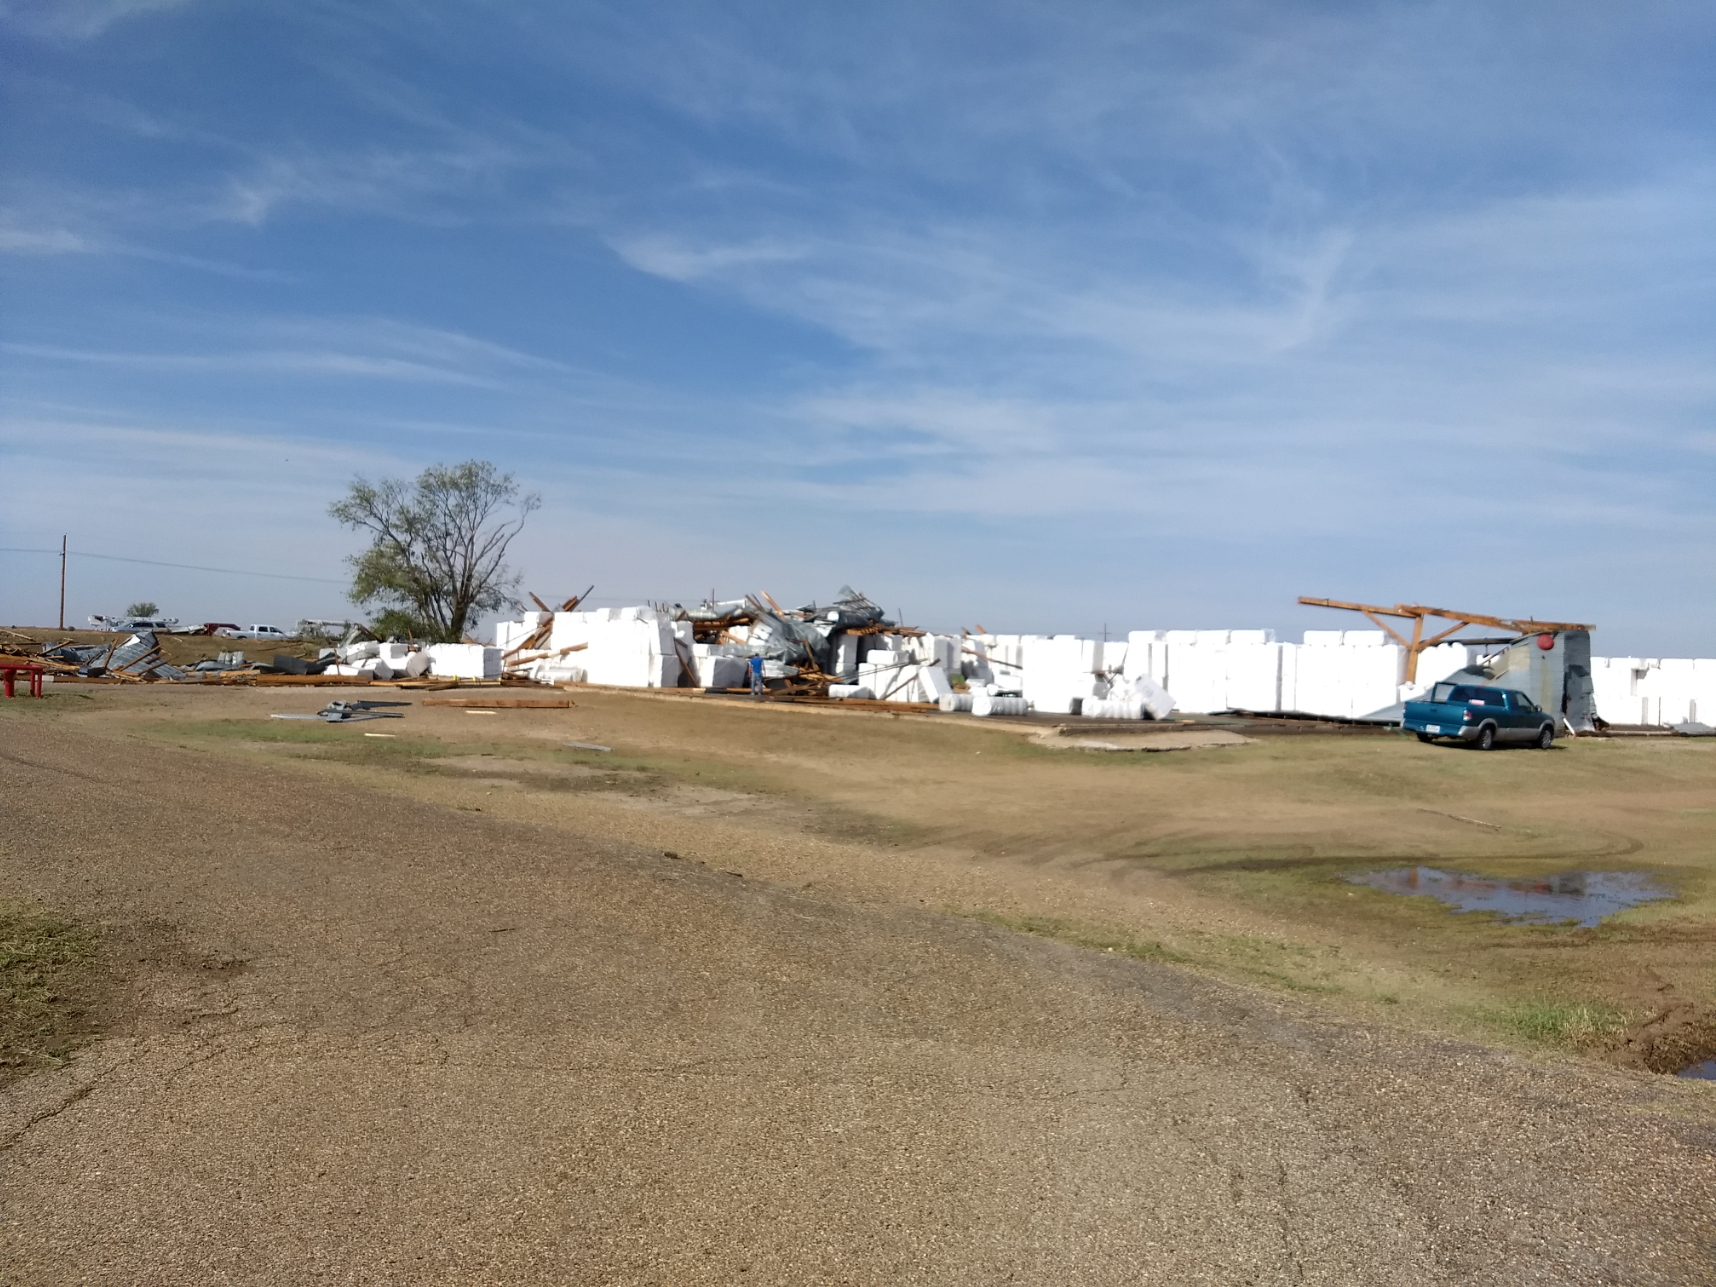 Damage sustained at the Ralls Compress in Ralls, TX, on the evening of 1 June 2018.